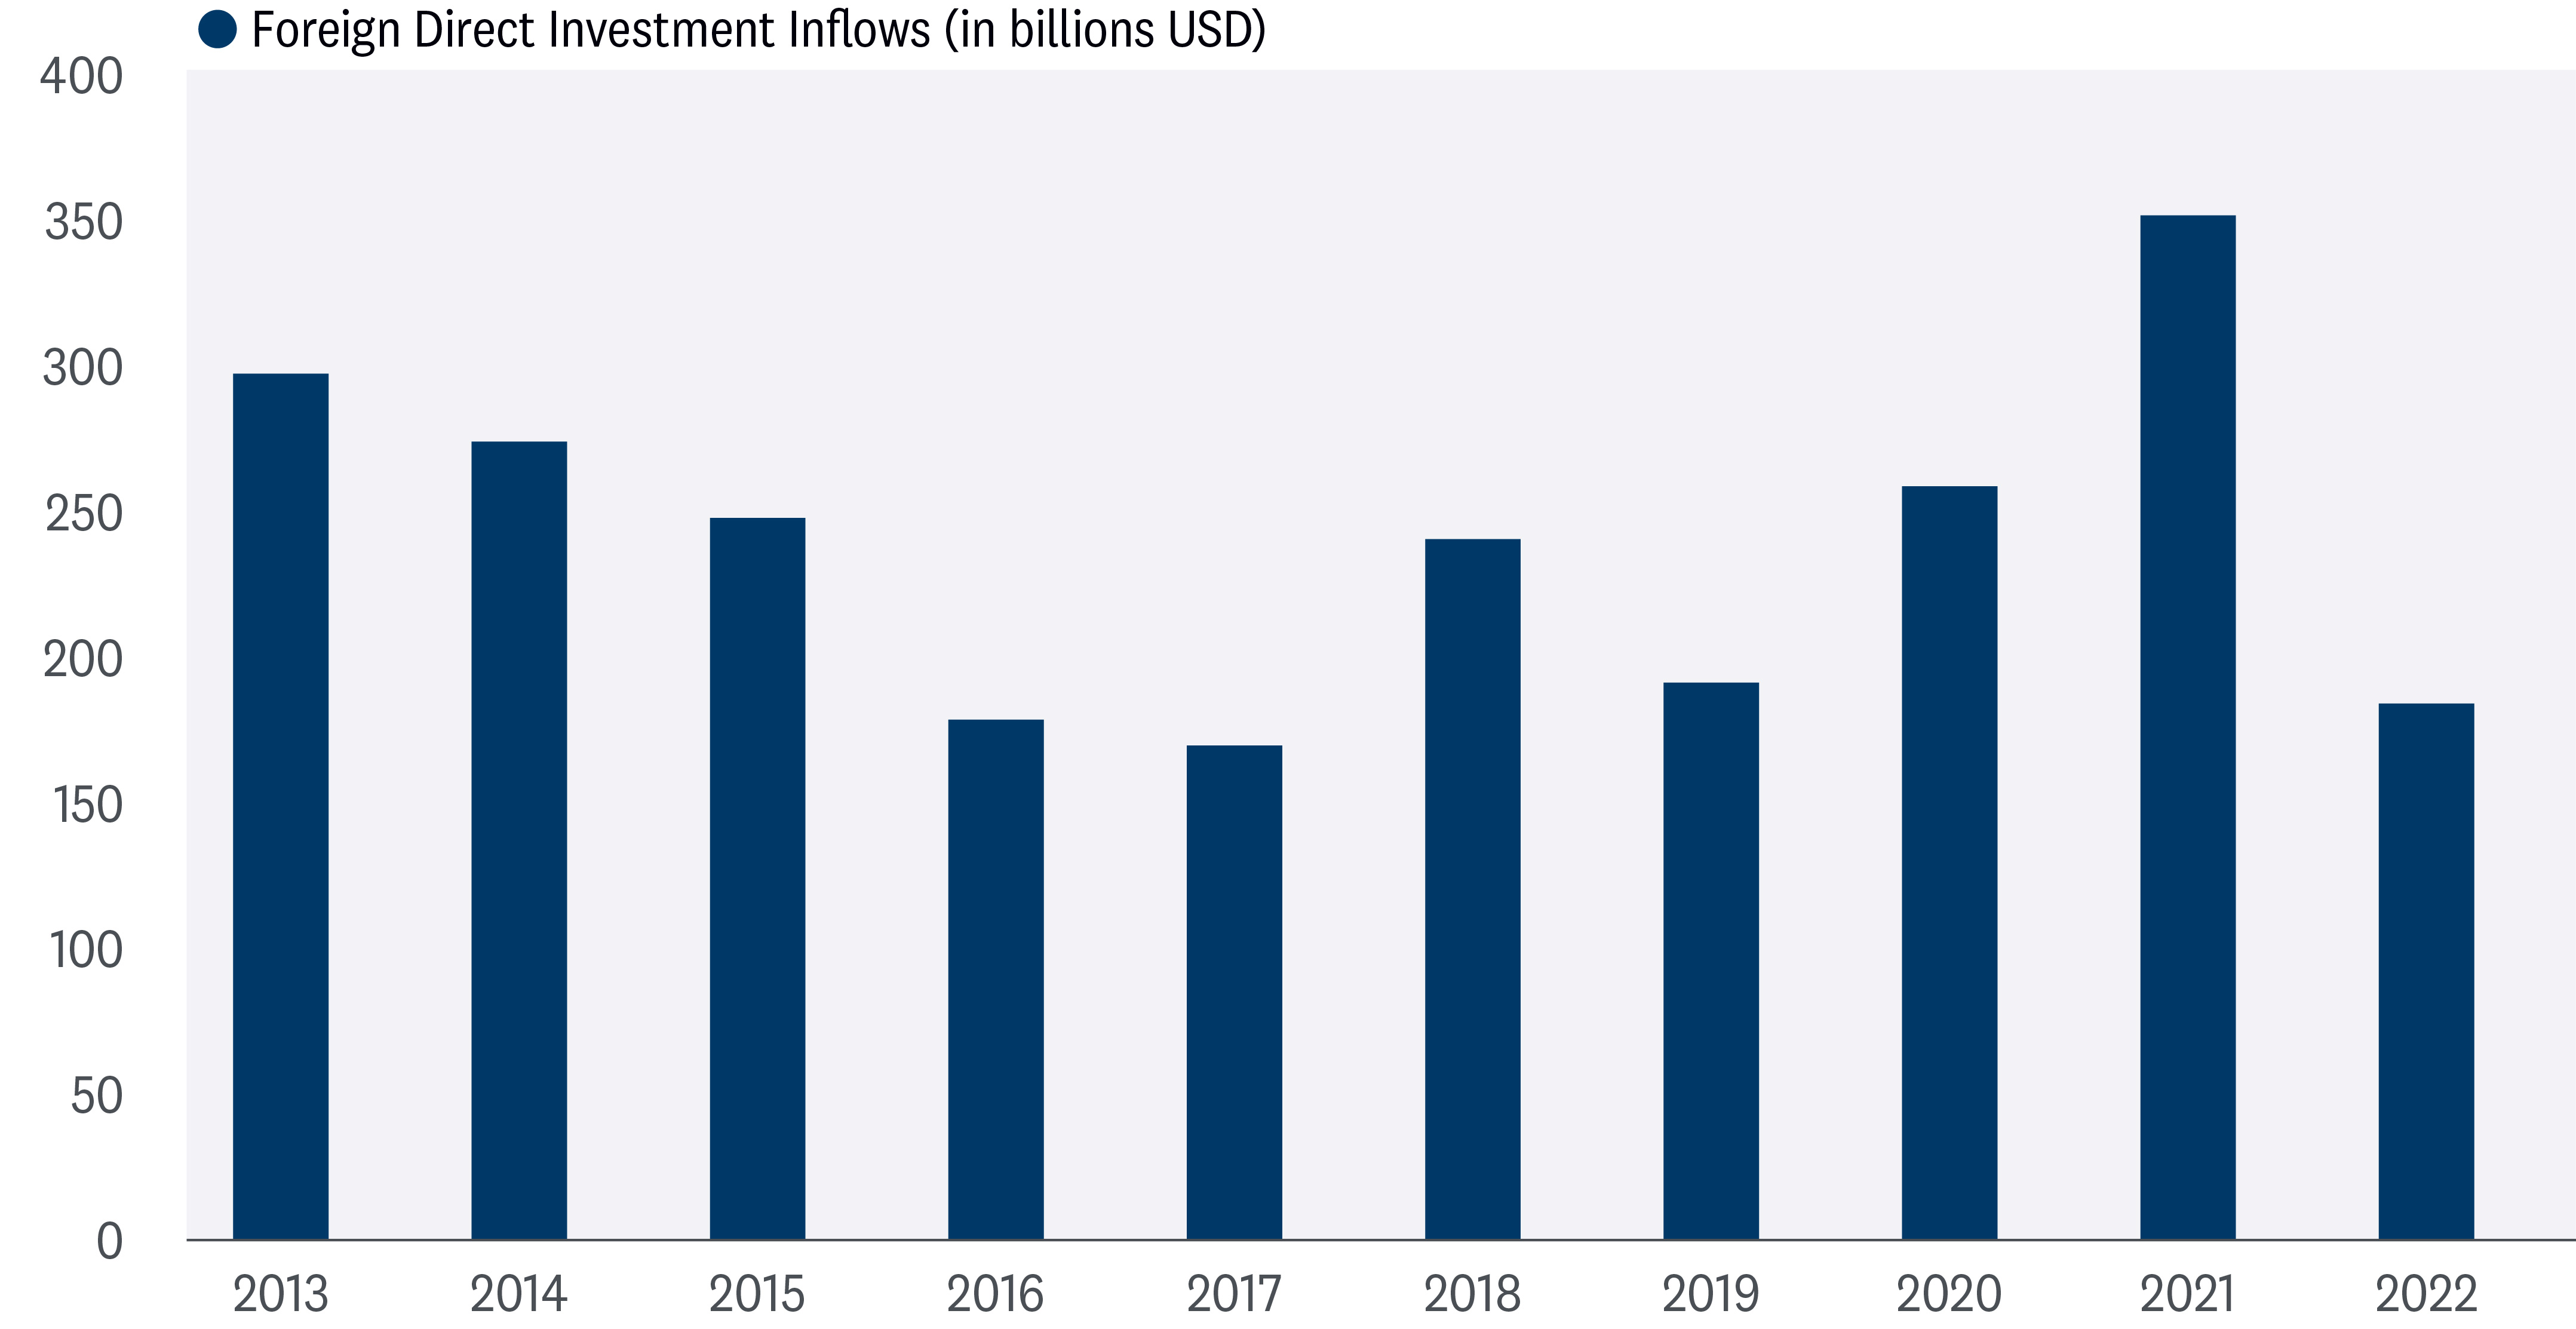 The chart depicts the foreign direct investment inflows into a country over a 10-year period from 2013 to 2022. The y-axis represents the amount of foreign direct investment inflows in billions of USD, while the x-axis represents the year. The chart reveals that the foreign direct investment inflows reached a peak in 2021, with a value of 350 billion USD. The lowest point was in 2016, with a value of 175 billion USD.